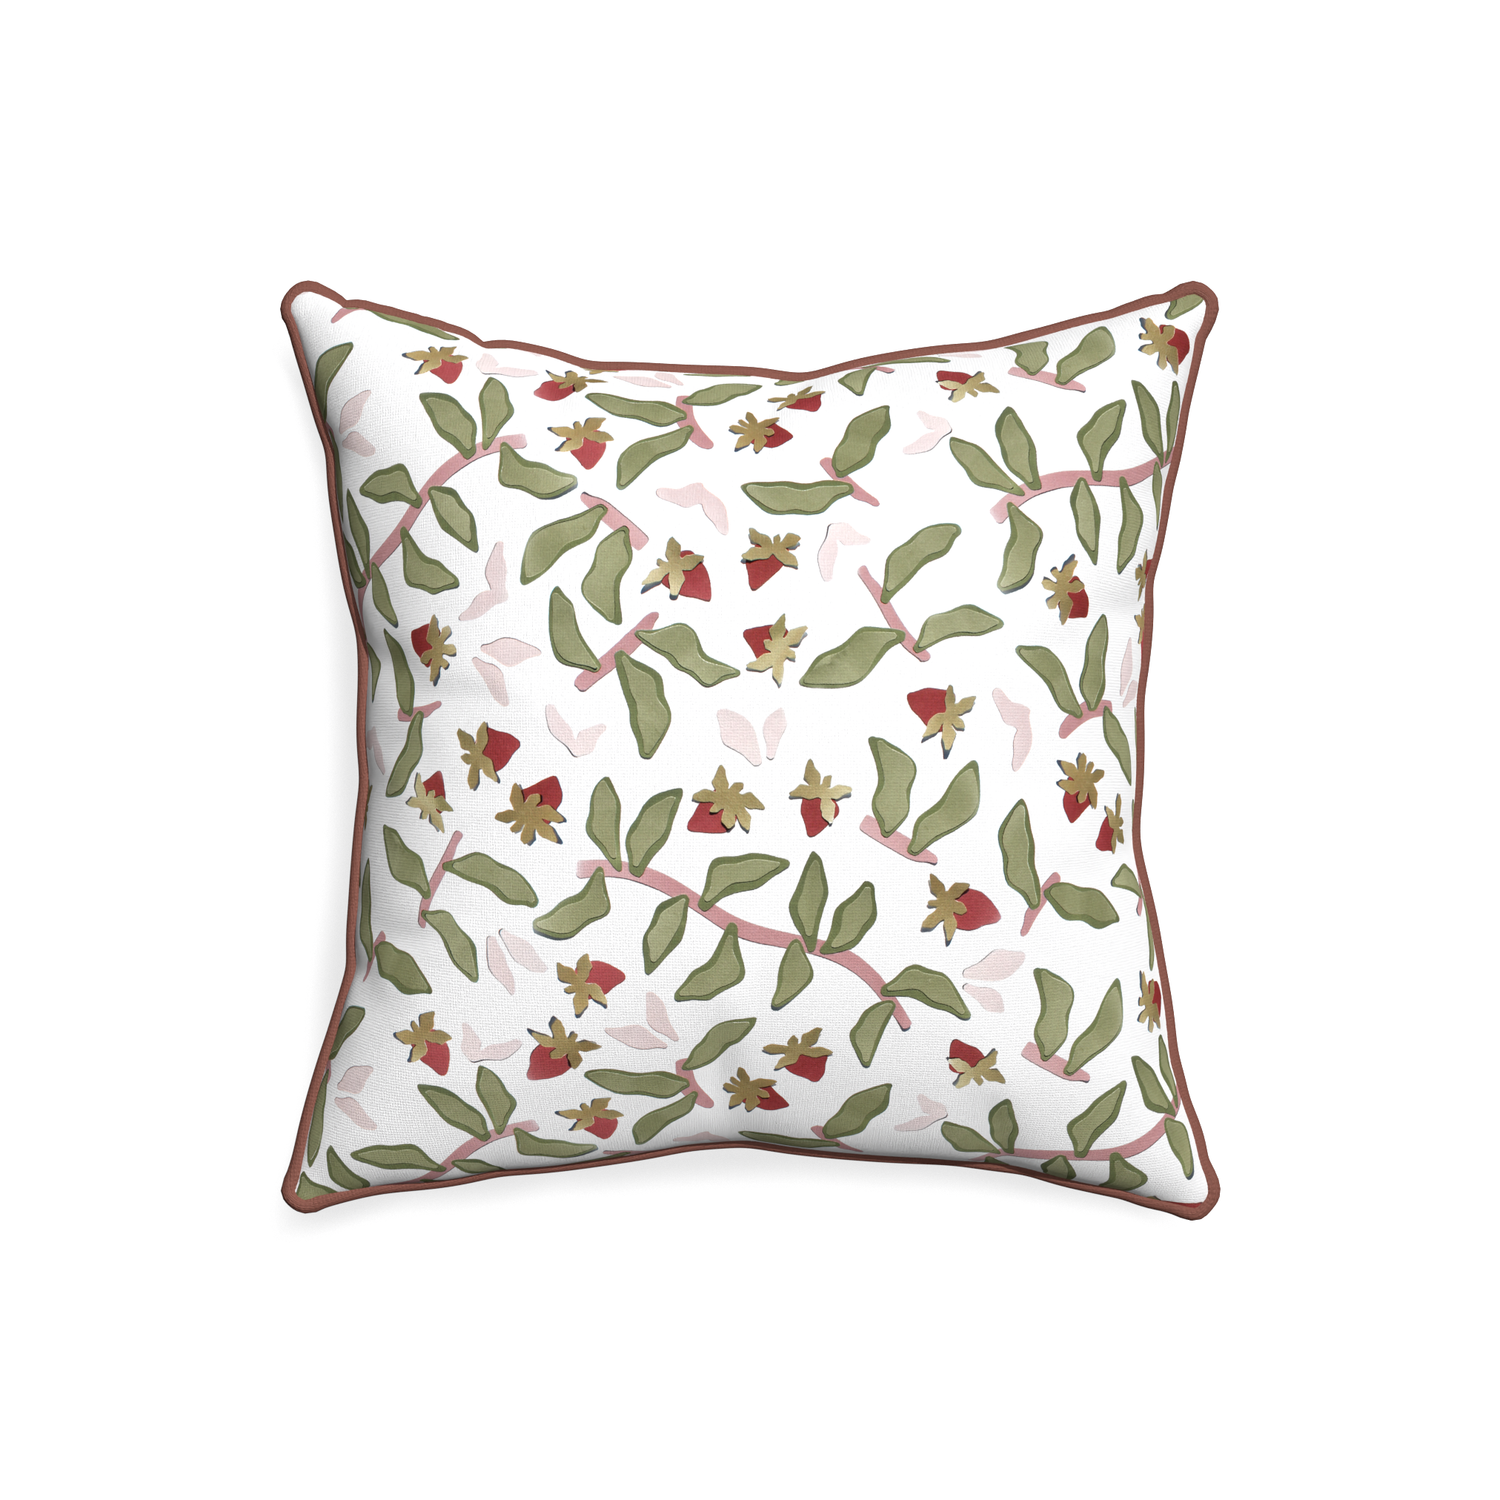 20-square nellie custom pillow with w piping on white background